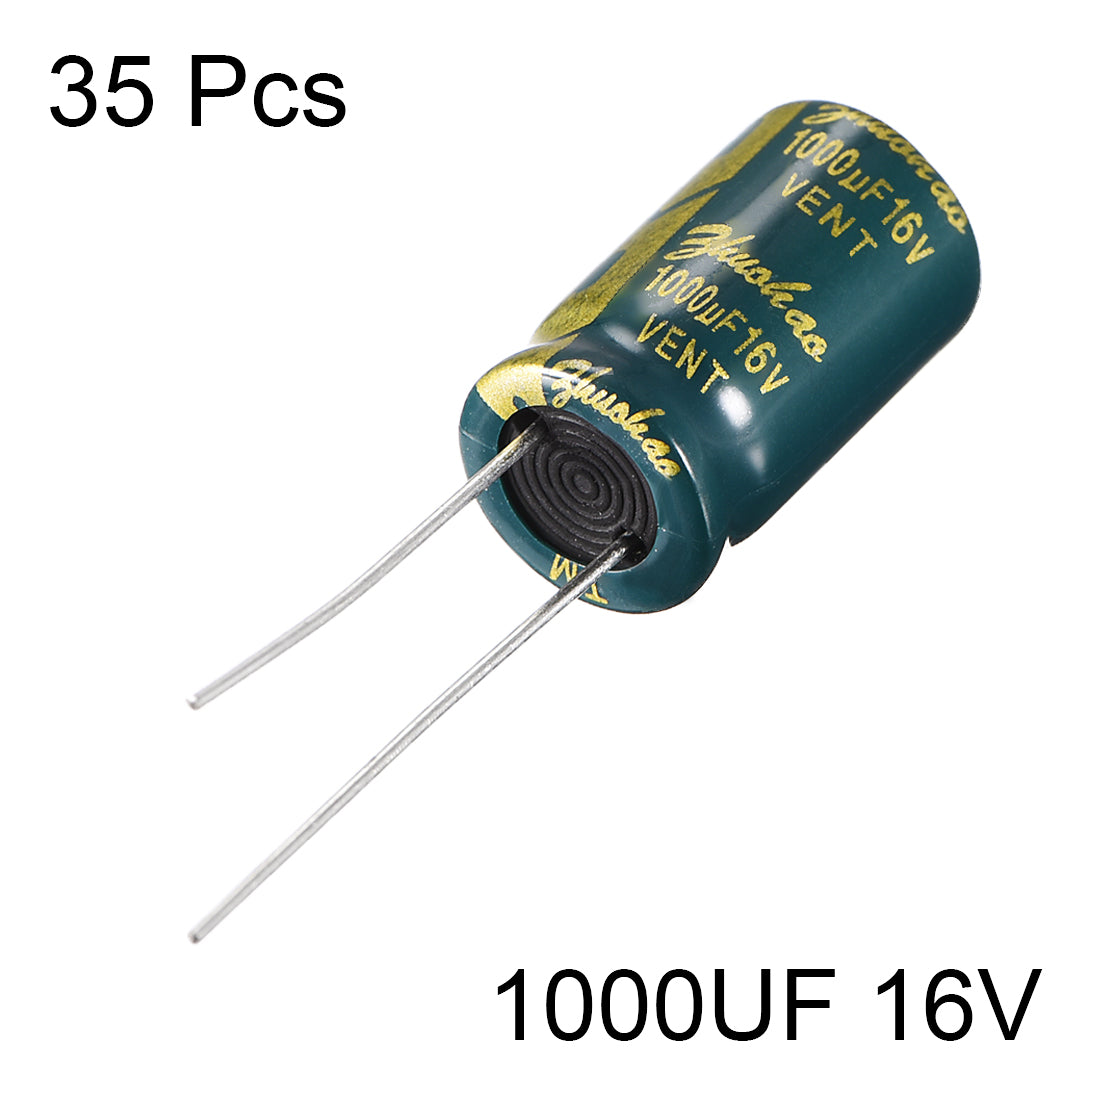 uxcell Uxcell Aluminum Radial Electrolytic Capacitor Low ESR Green with 1000UF 16V 105 Celsius Life 3000H 10 x 17 mm High Ripple Current,Low Impedance 35pcs